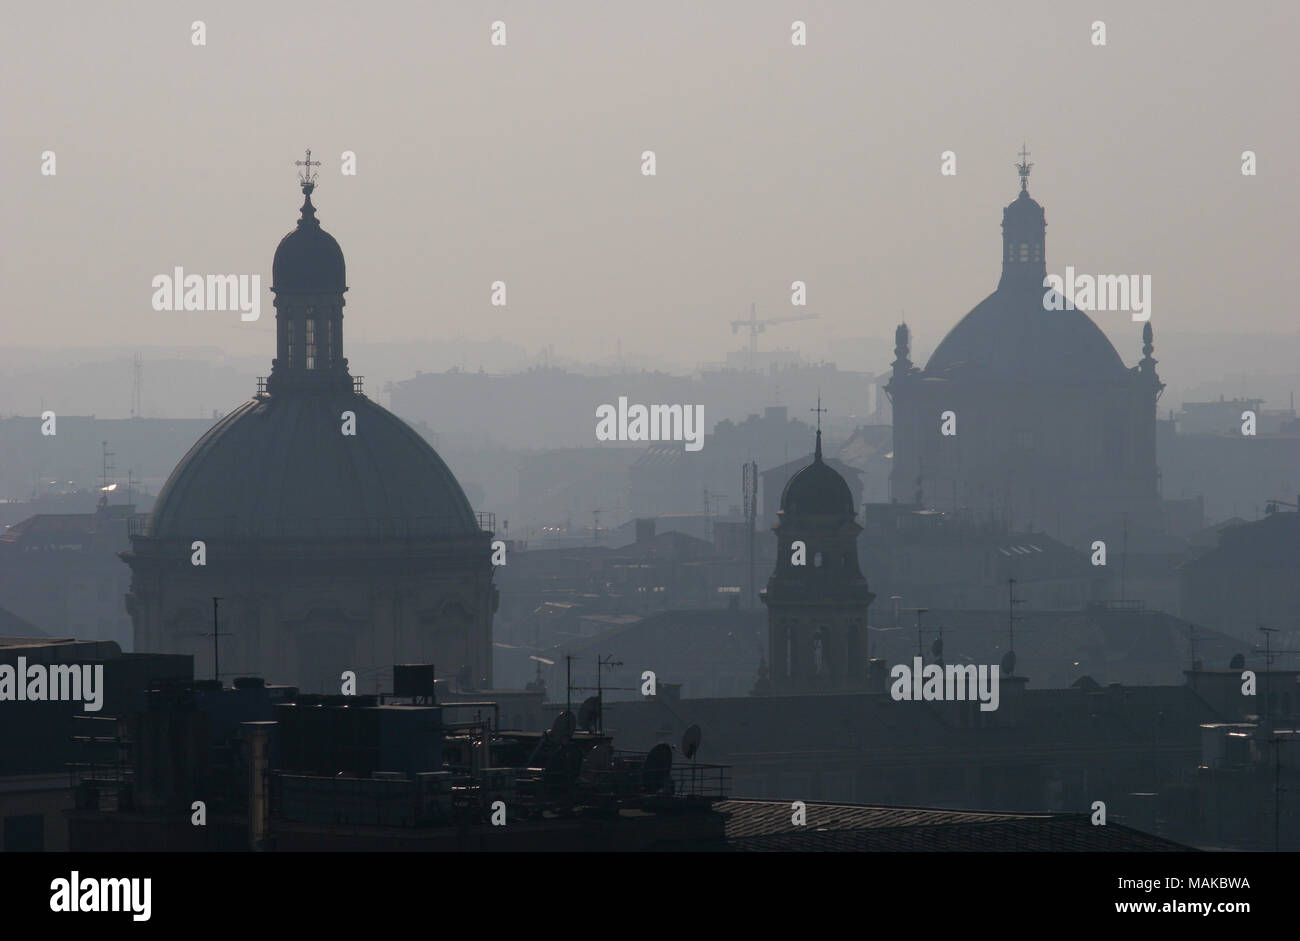 Terrible air pollution or smog from traffic fumes visible on the Milan city skyline. Polluted poor air quality. Stock Photo